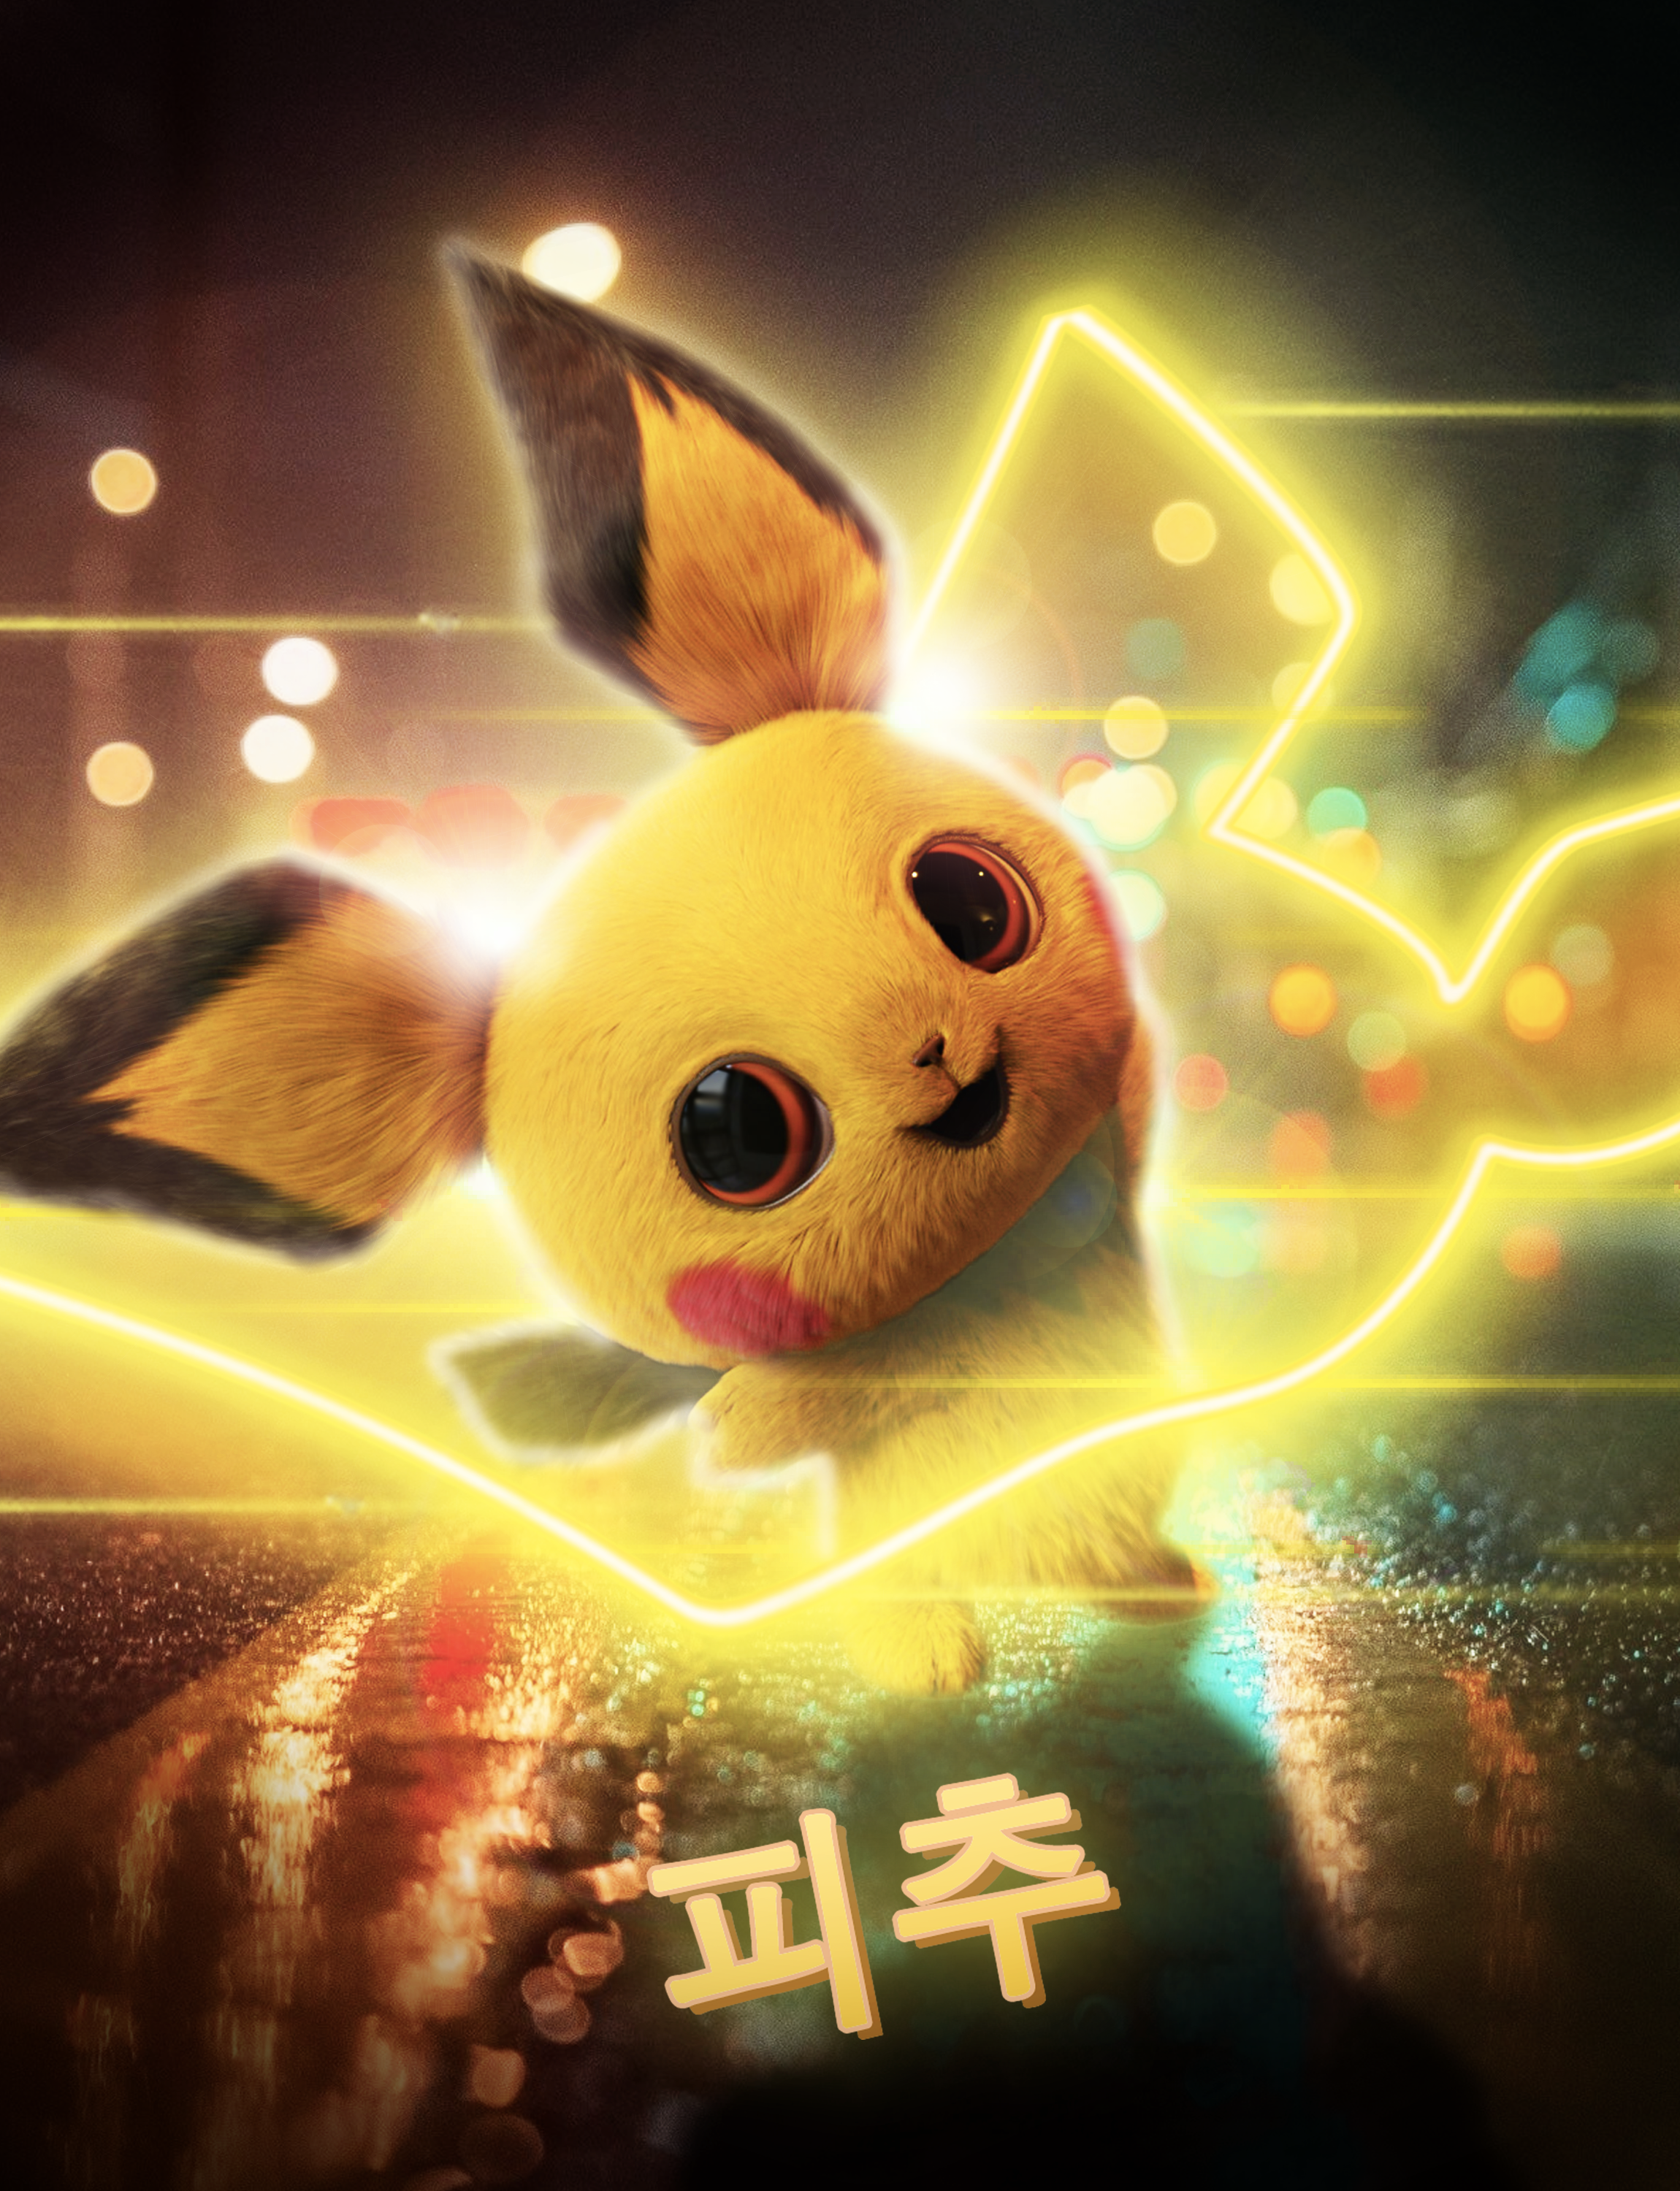 My detective Pichu editraw and other languages in comments